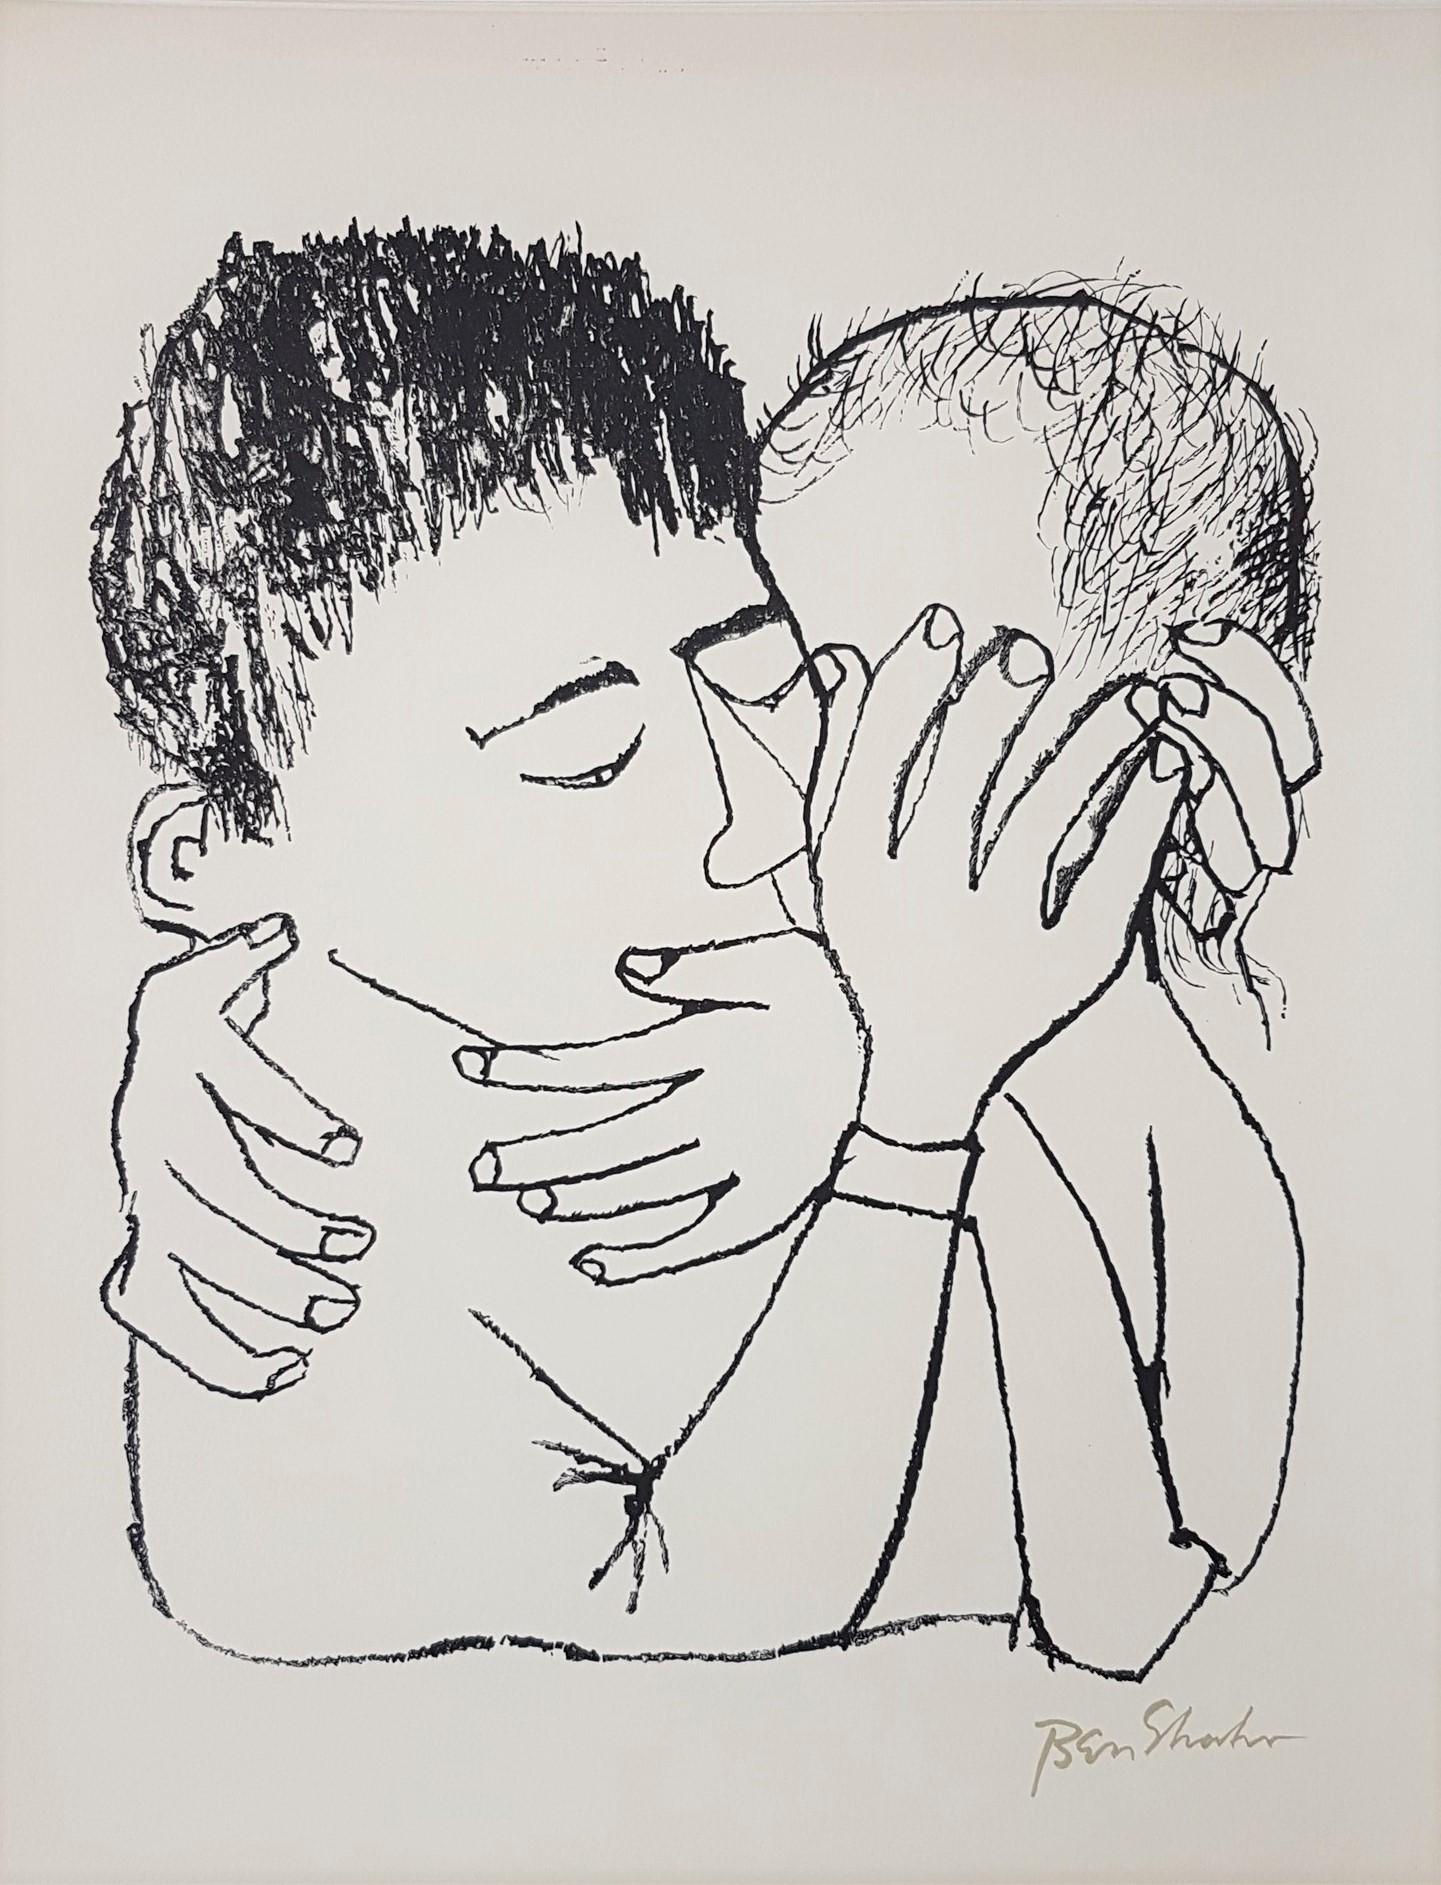 Partings long seen coming - For the Sake of A Single Verse Rainer Maria Rilke - Print by Ben Shahn